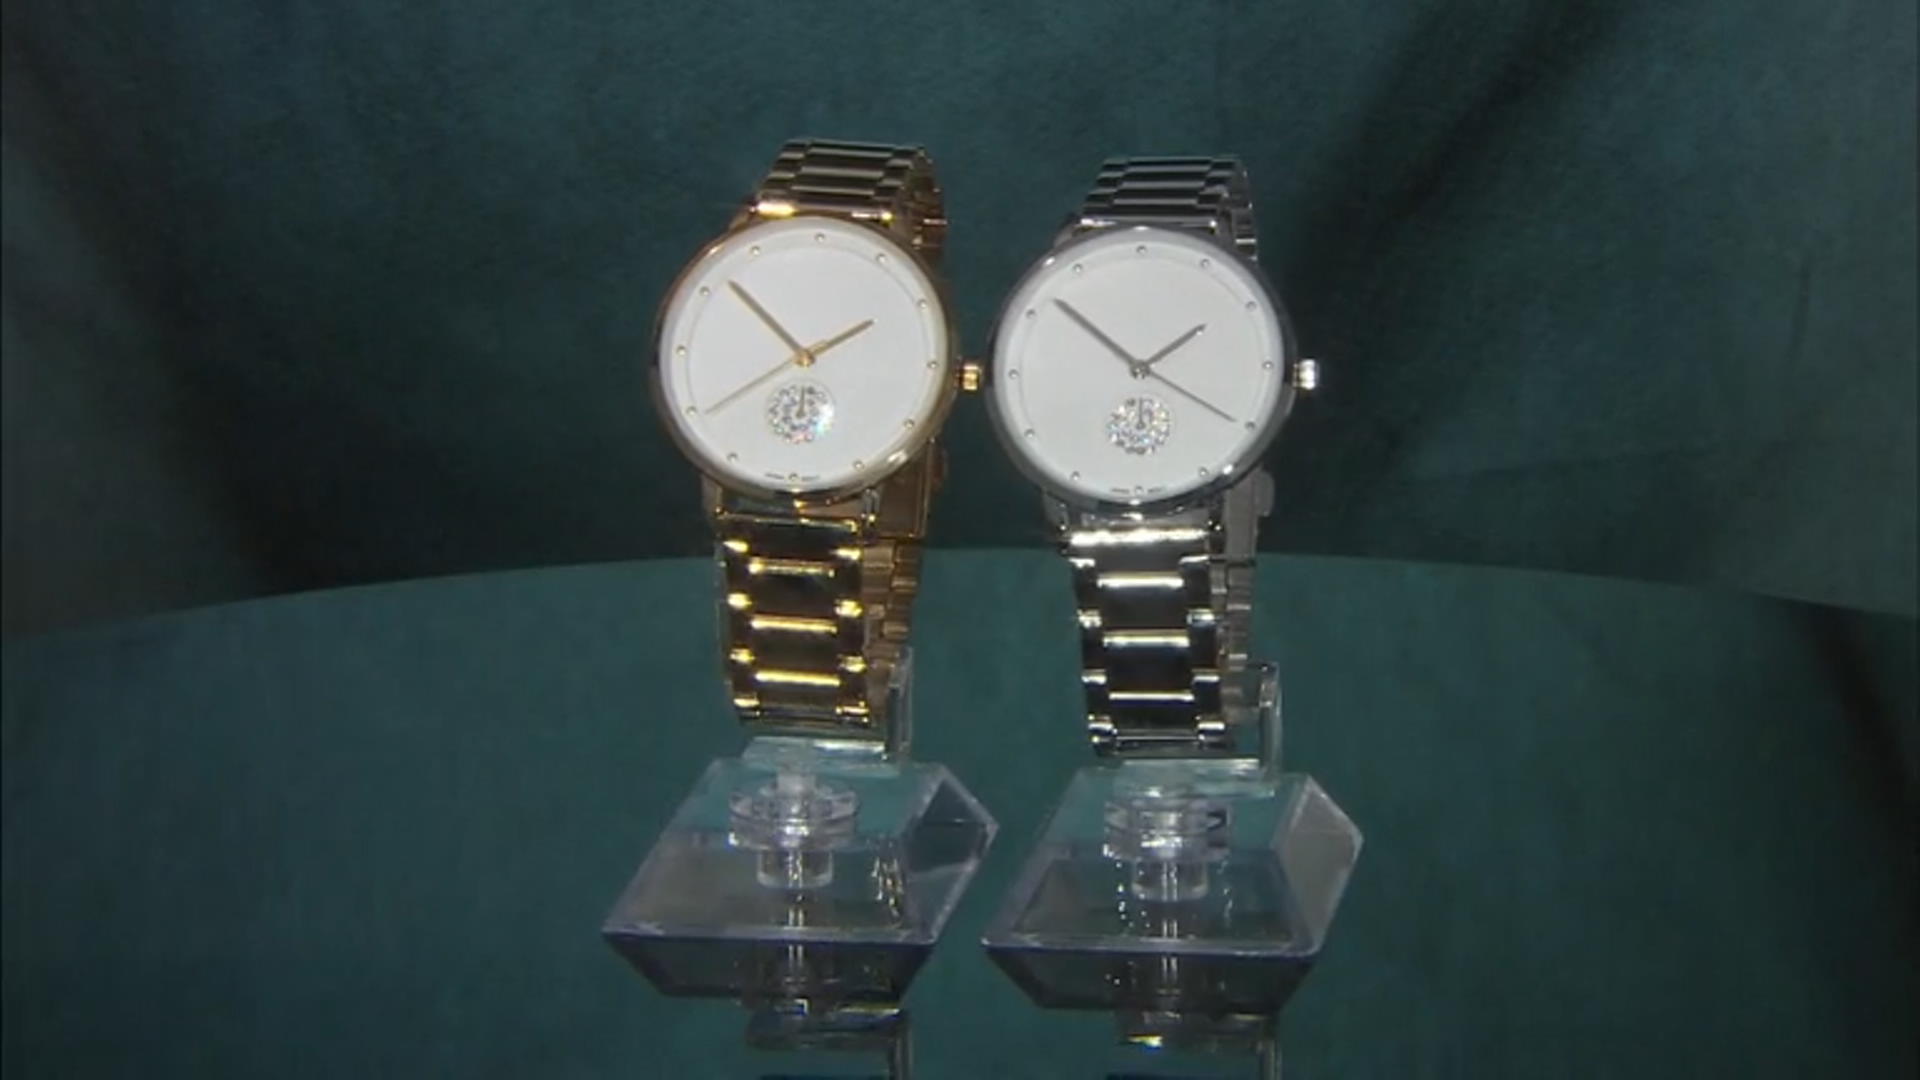 White Crystal Sub Dial Dial Gold Tone And Silver Tone Stainless Steel Band Watches. Set of 2 Video Thumbnail